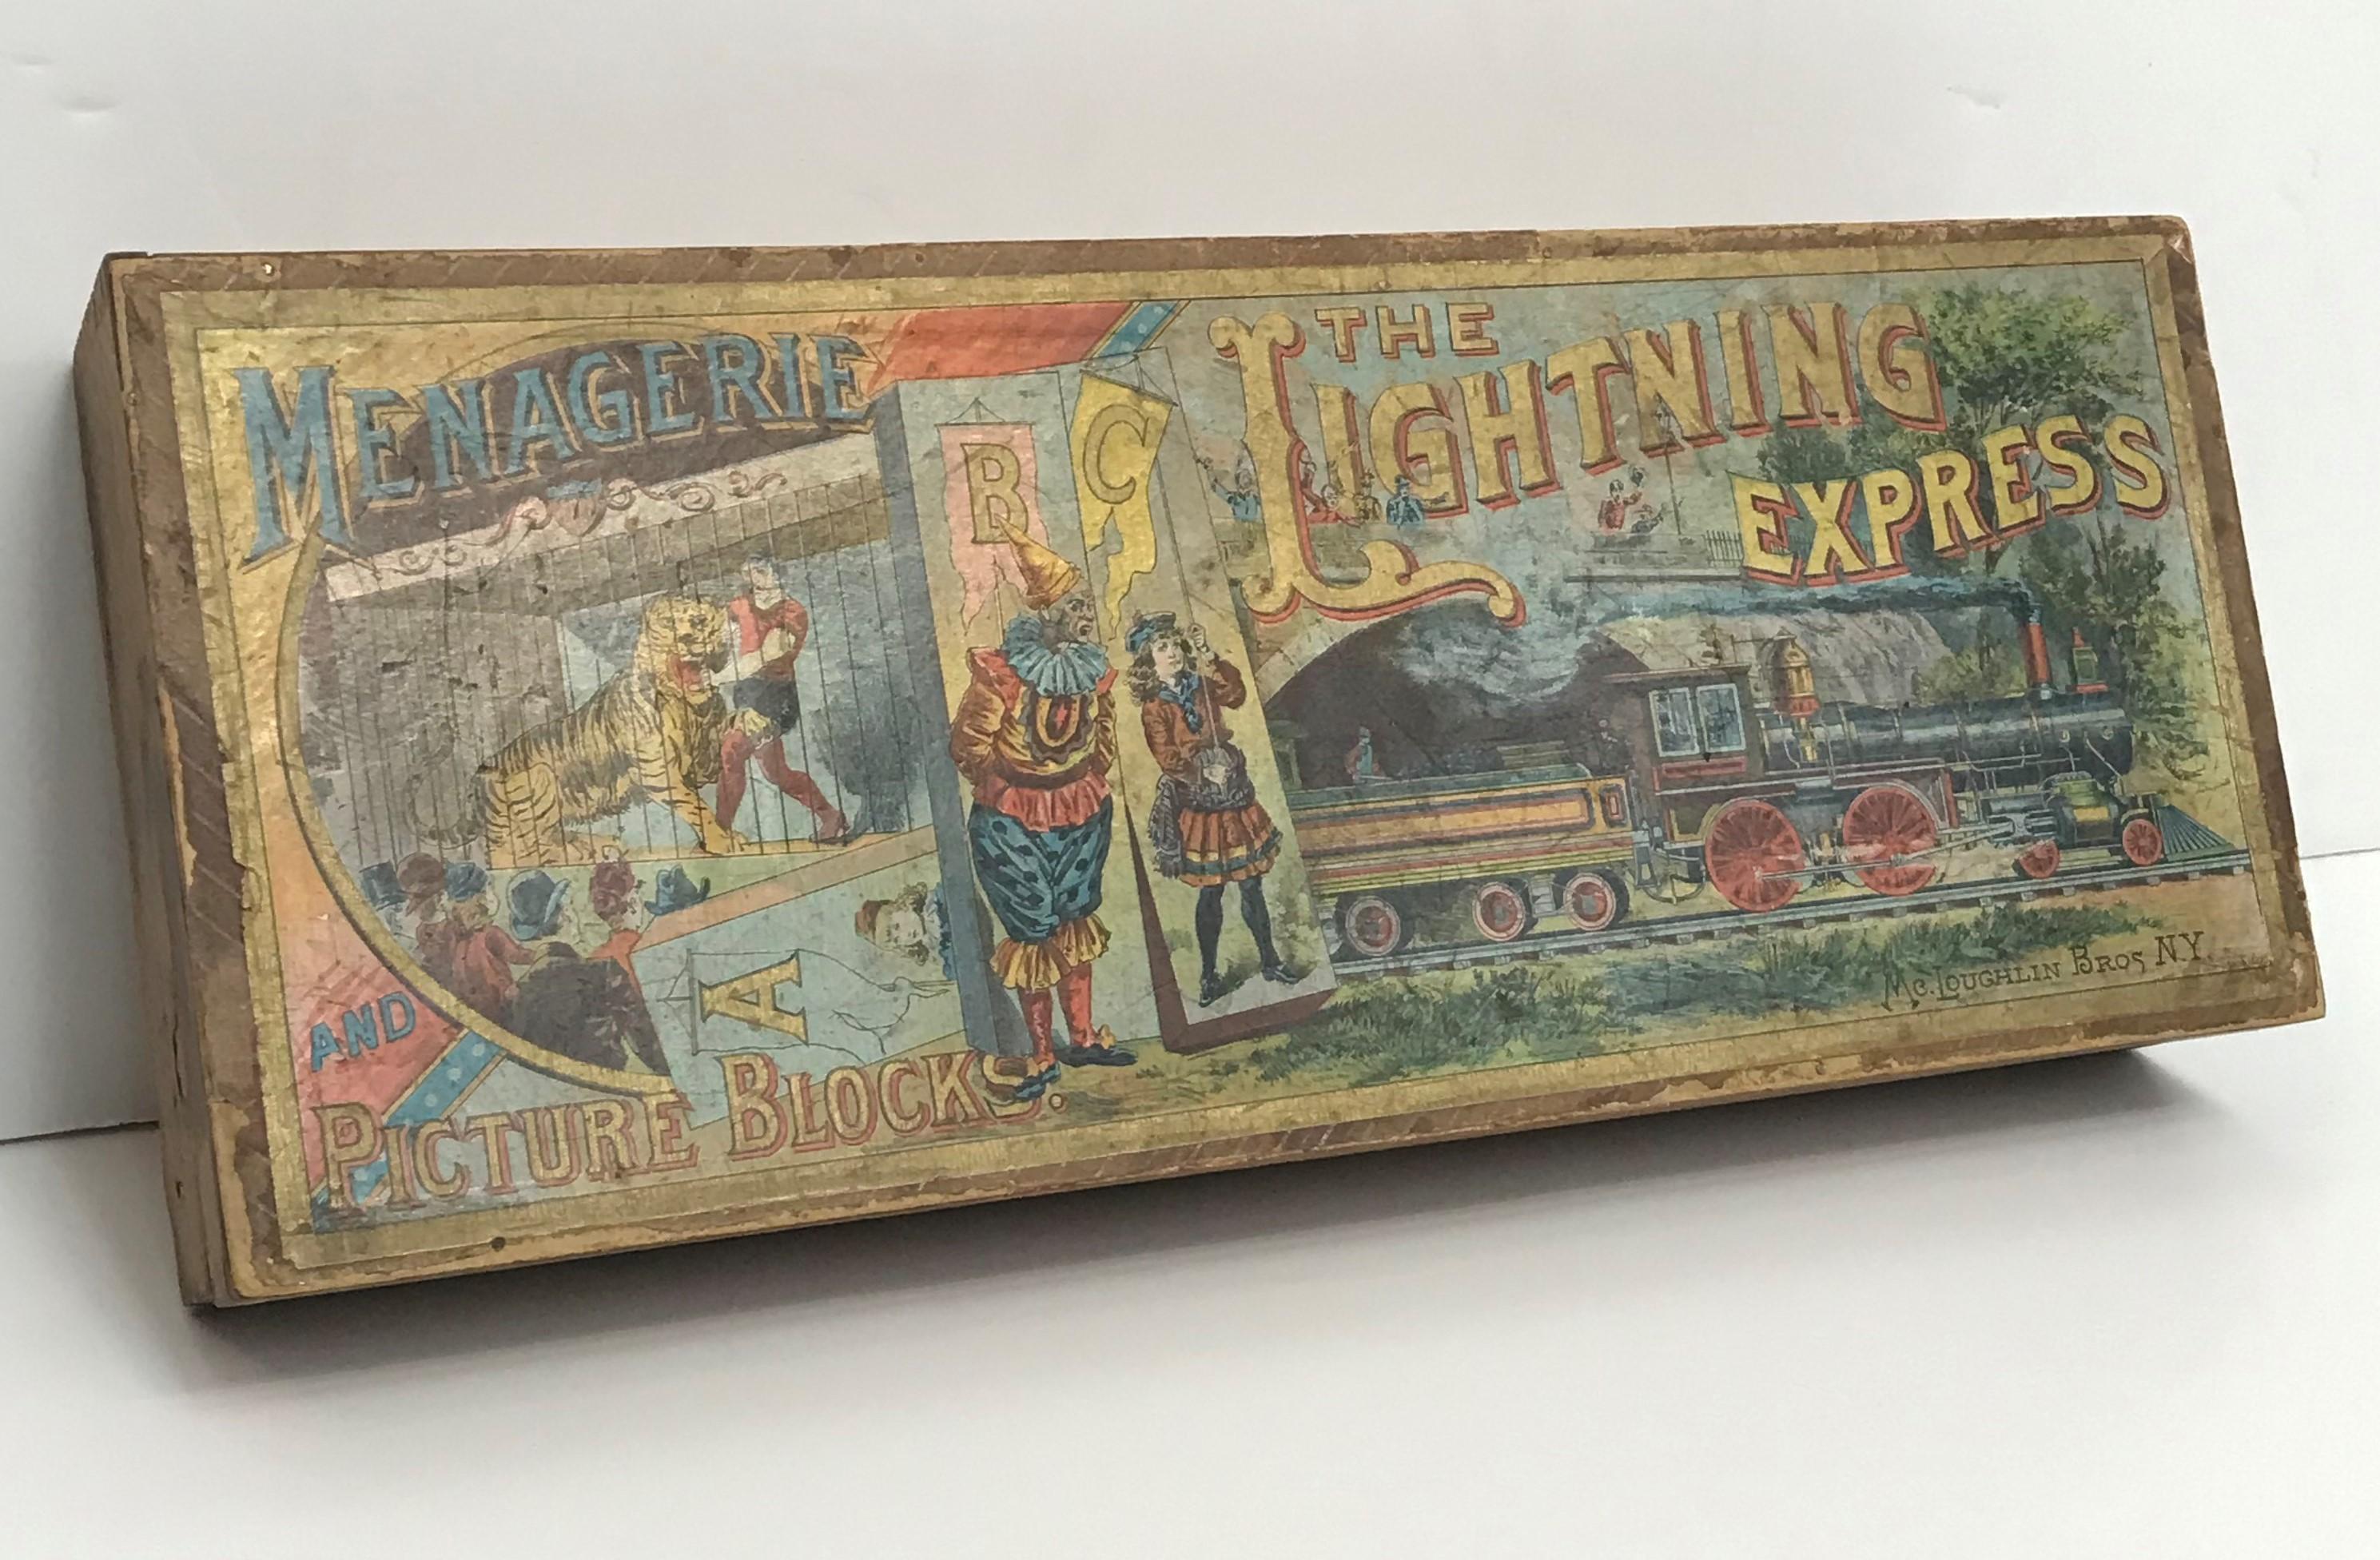 A large and complete set of Picture Blocks from the McLoughlin Brothers Company circa 1892 in original presentation box The set titled Menagerie and The Lightning Express features twelve heavy cardboard blocks printed with different themes on each